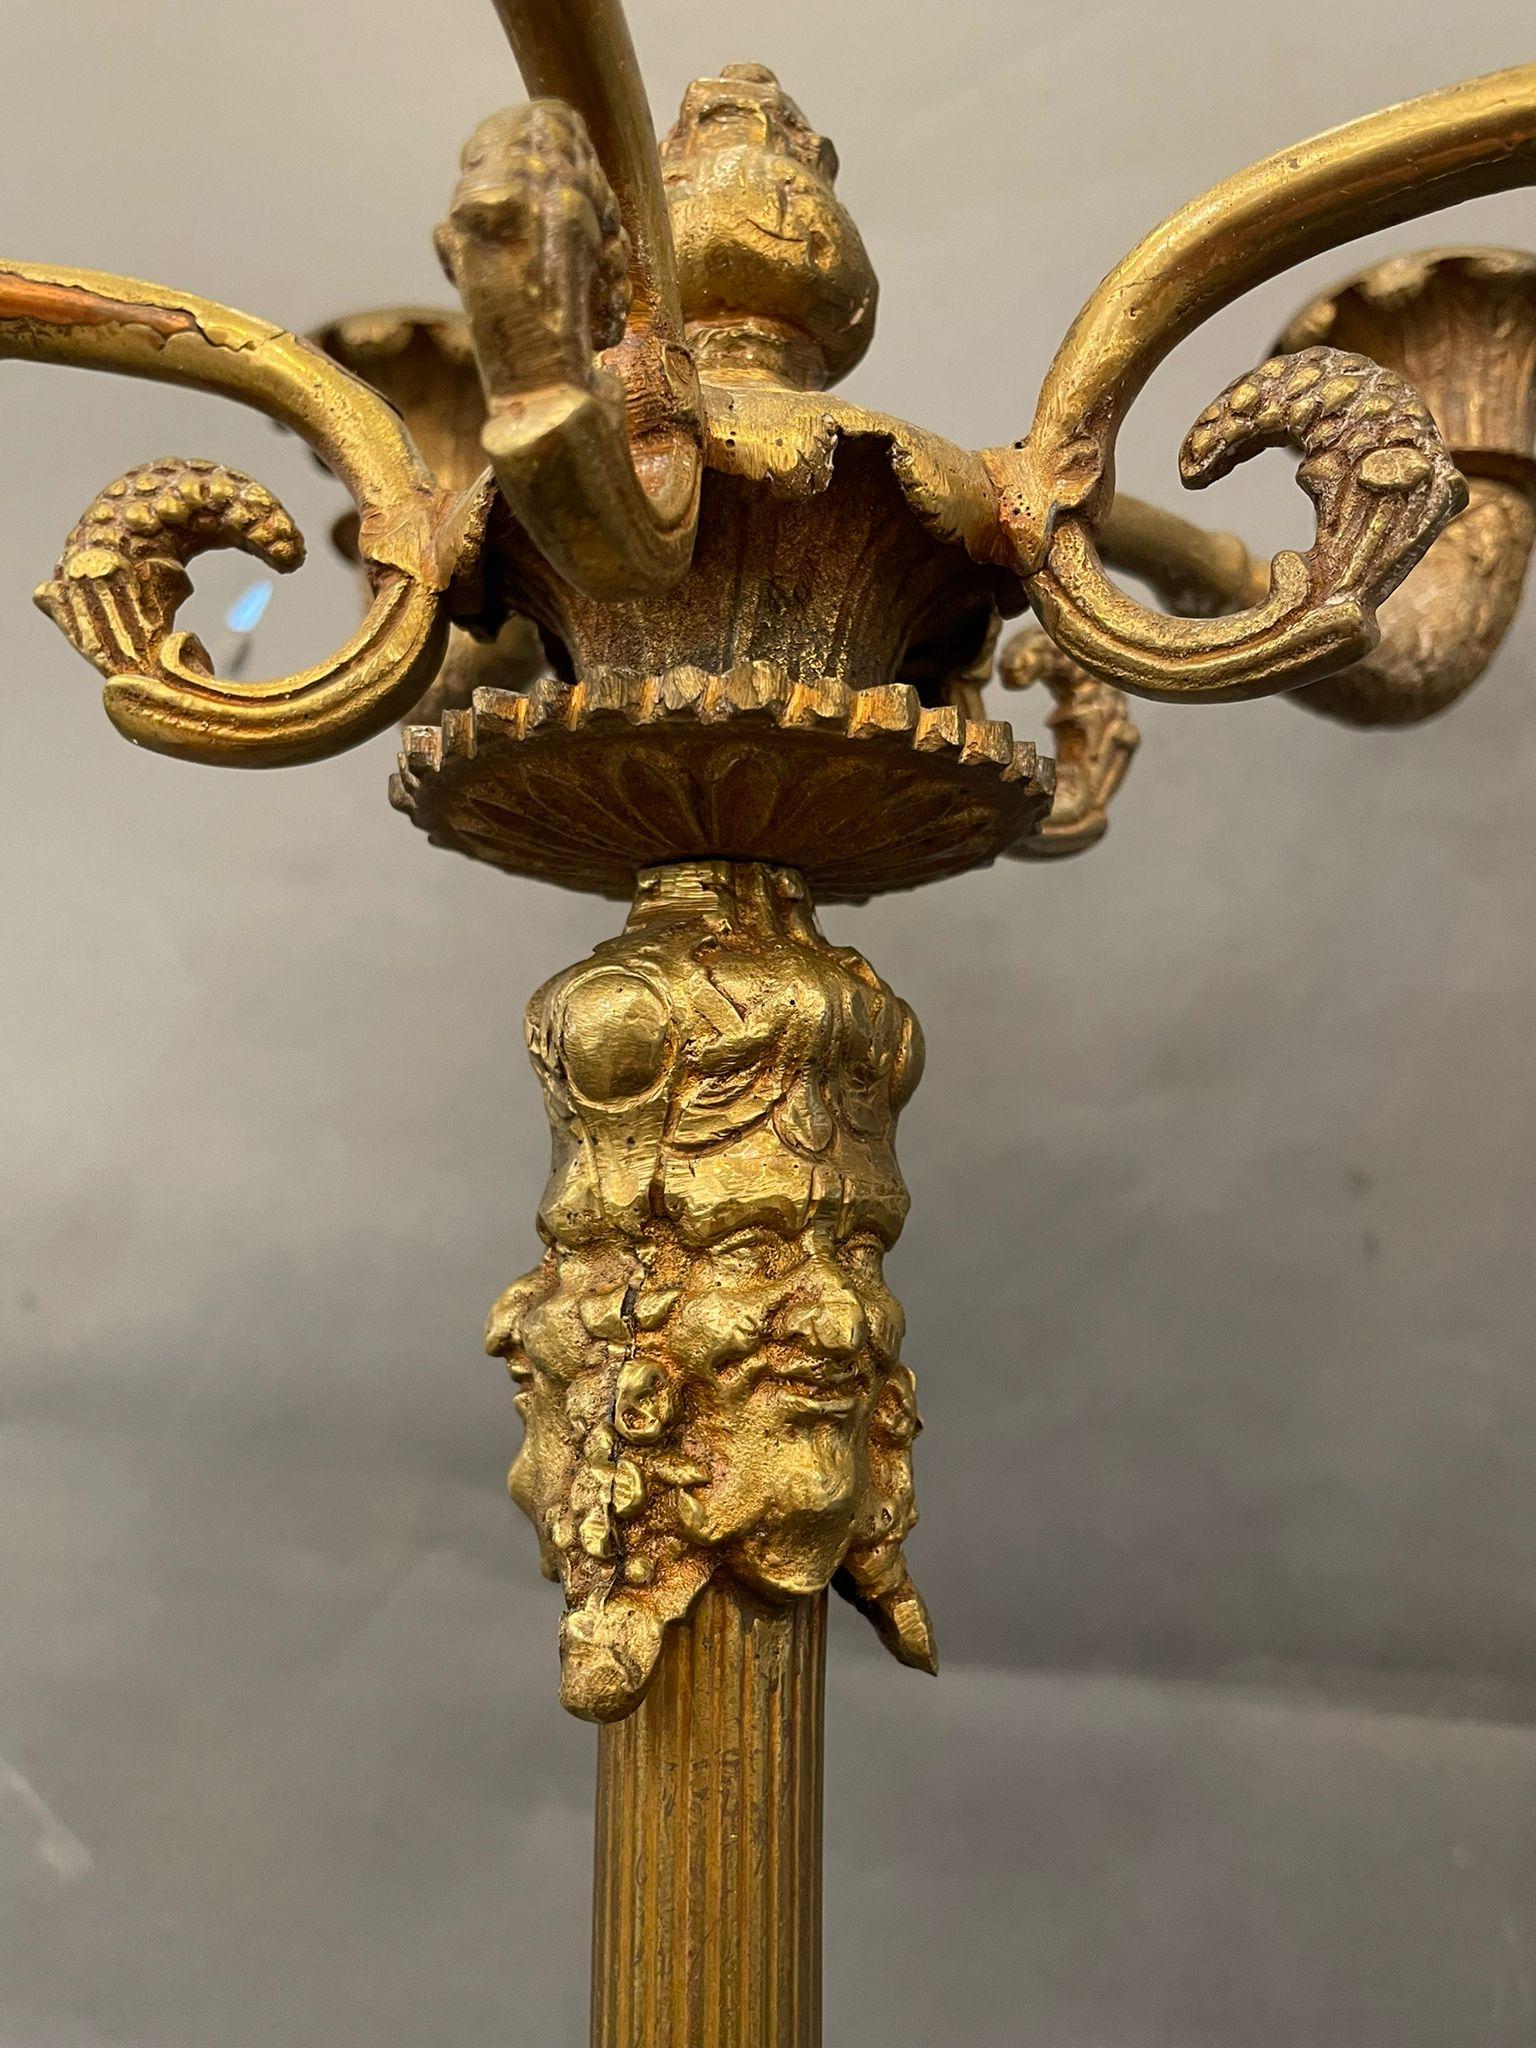 Pair of Italian Candelabras 1940s circa. Decorated with Bacchus' faces and grapes and vine leaves.